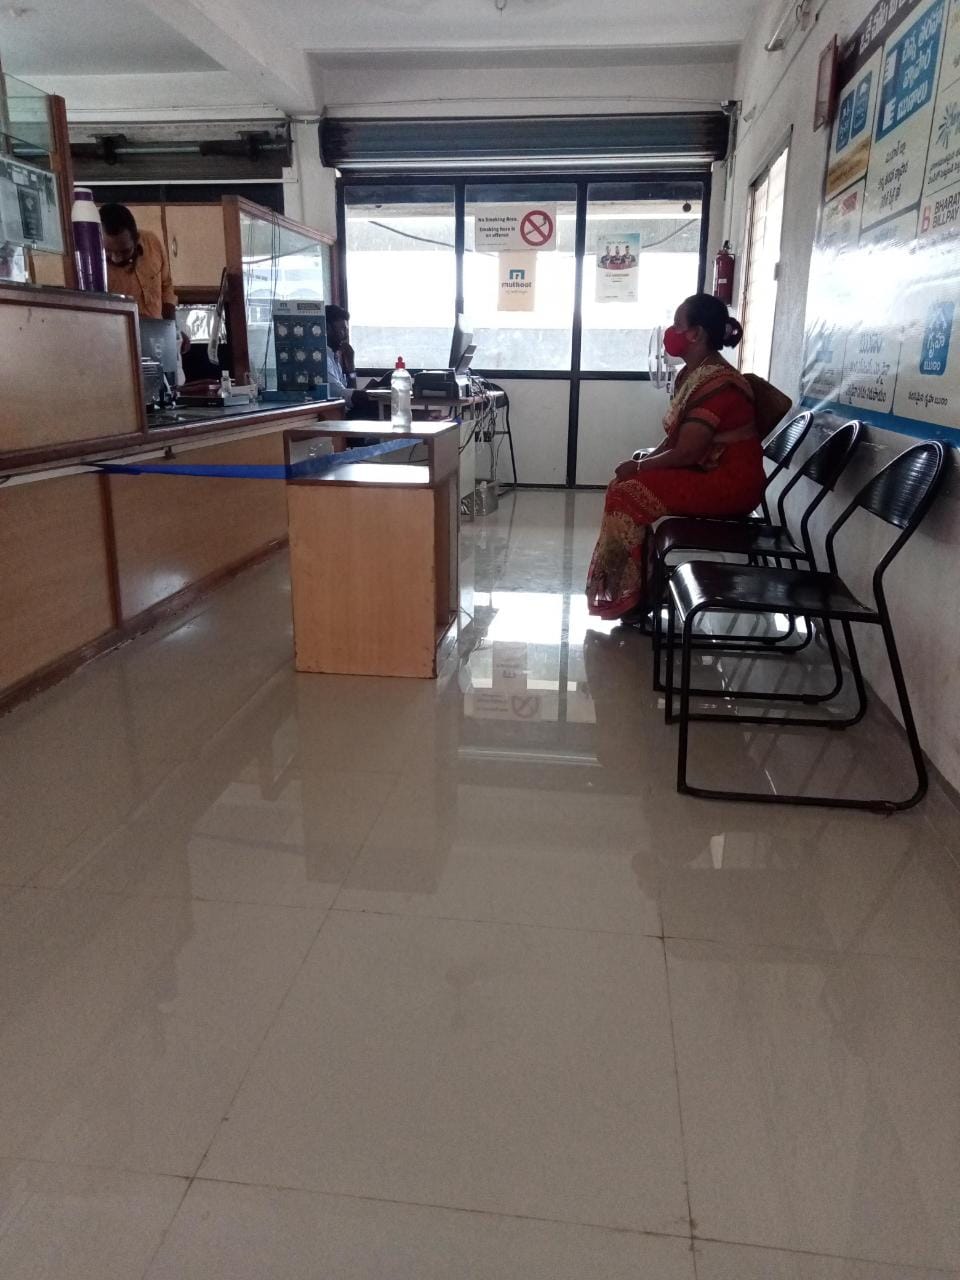 Photos and Videos of Muthoot Fincorp Gold Loan in Tadepalligudem, West Godavari